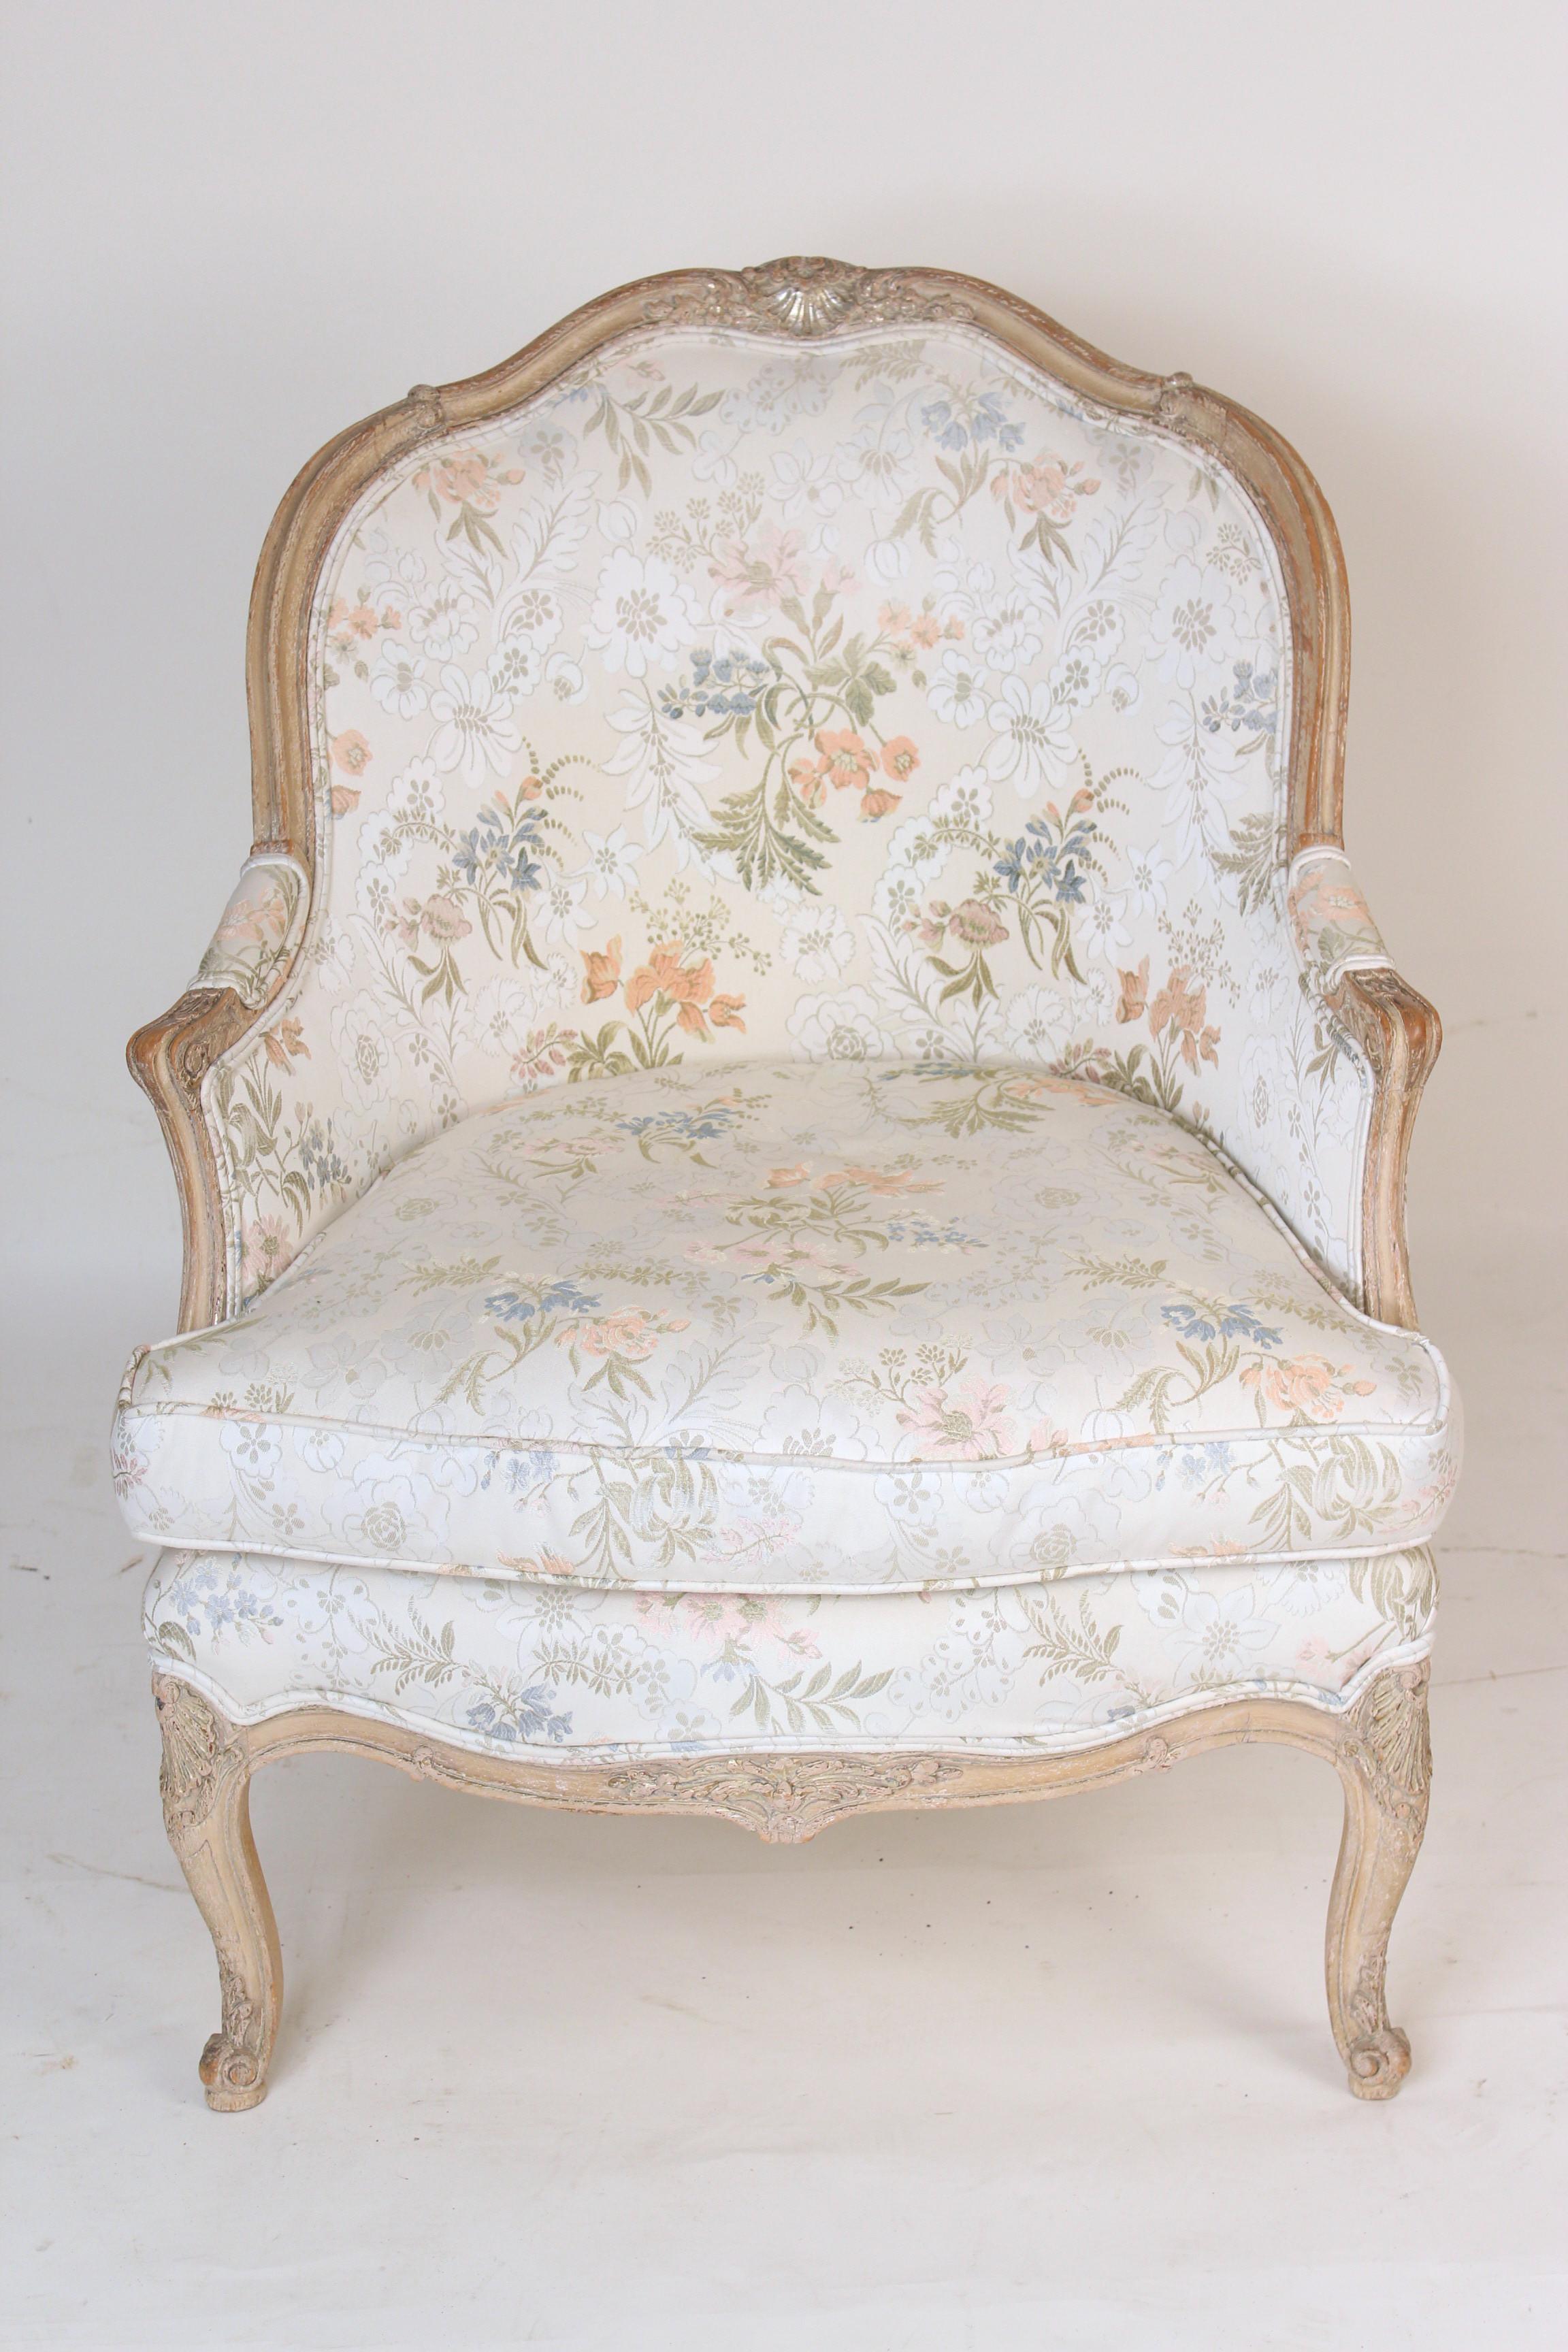 Louis XV style bergere with painted finish and traces of silver leaf, mid-20th century. This chair has very nice quality upholstery.